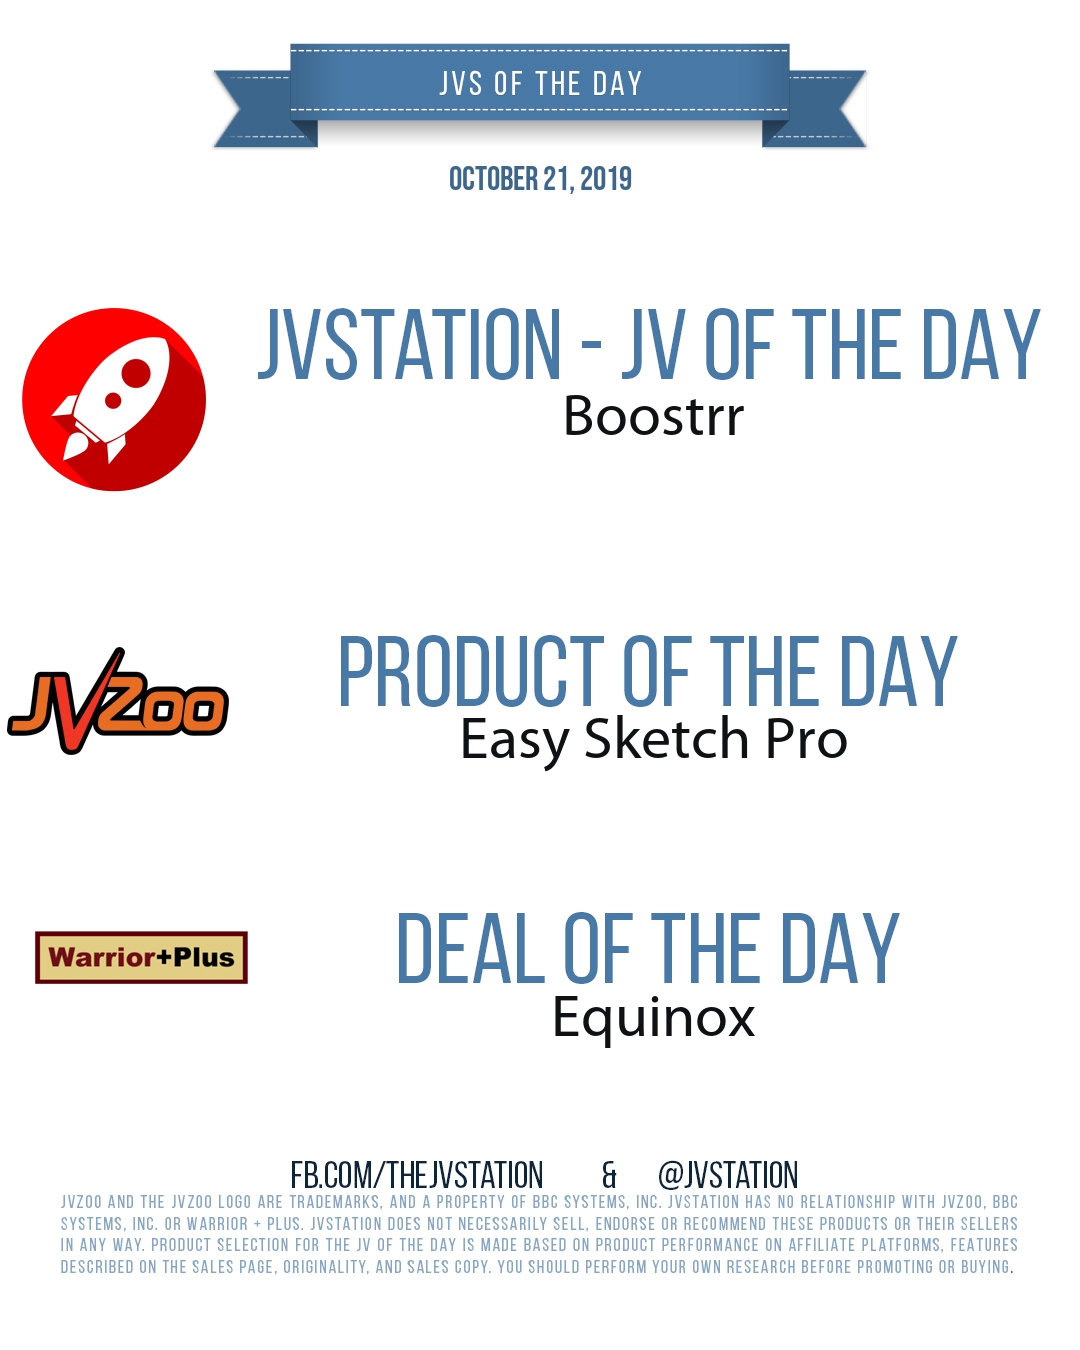 JVs of the day - October 21, 2019